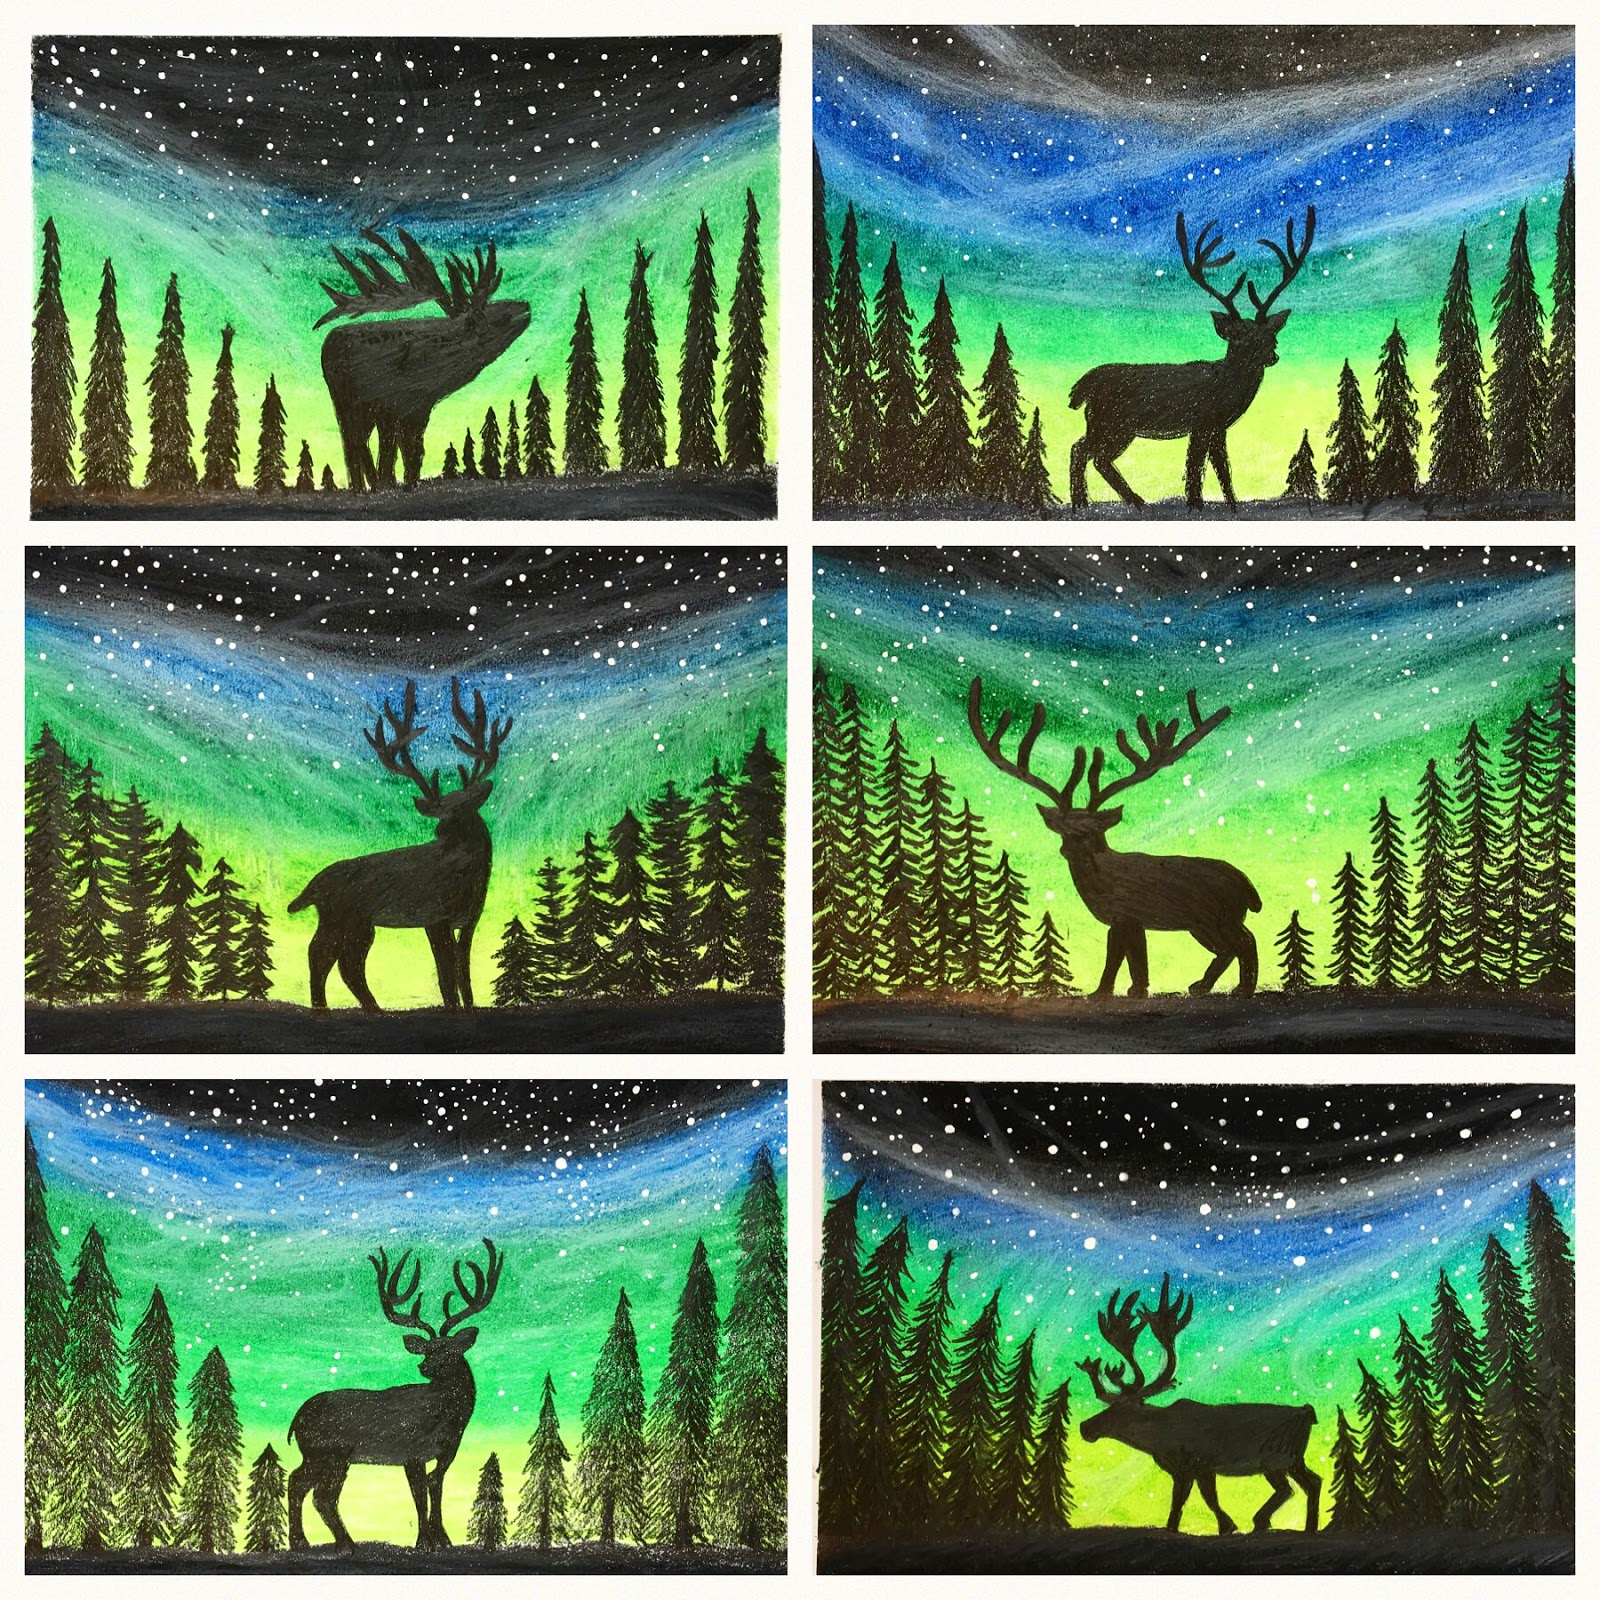 Art Room Britt: Silhouetted Deer and Trees with Aurora